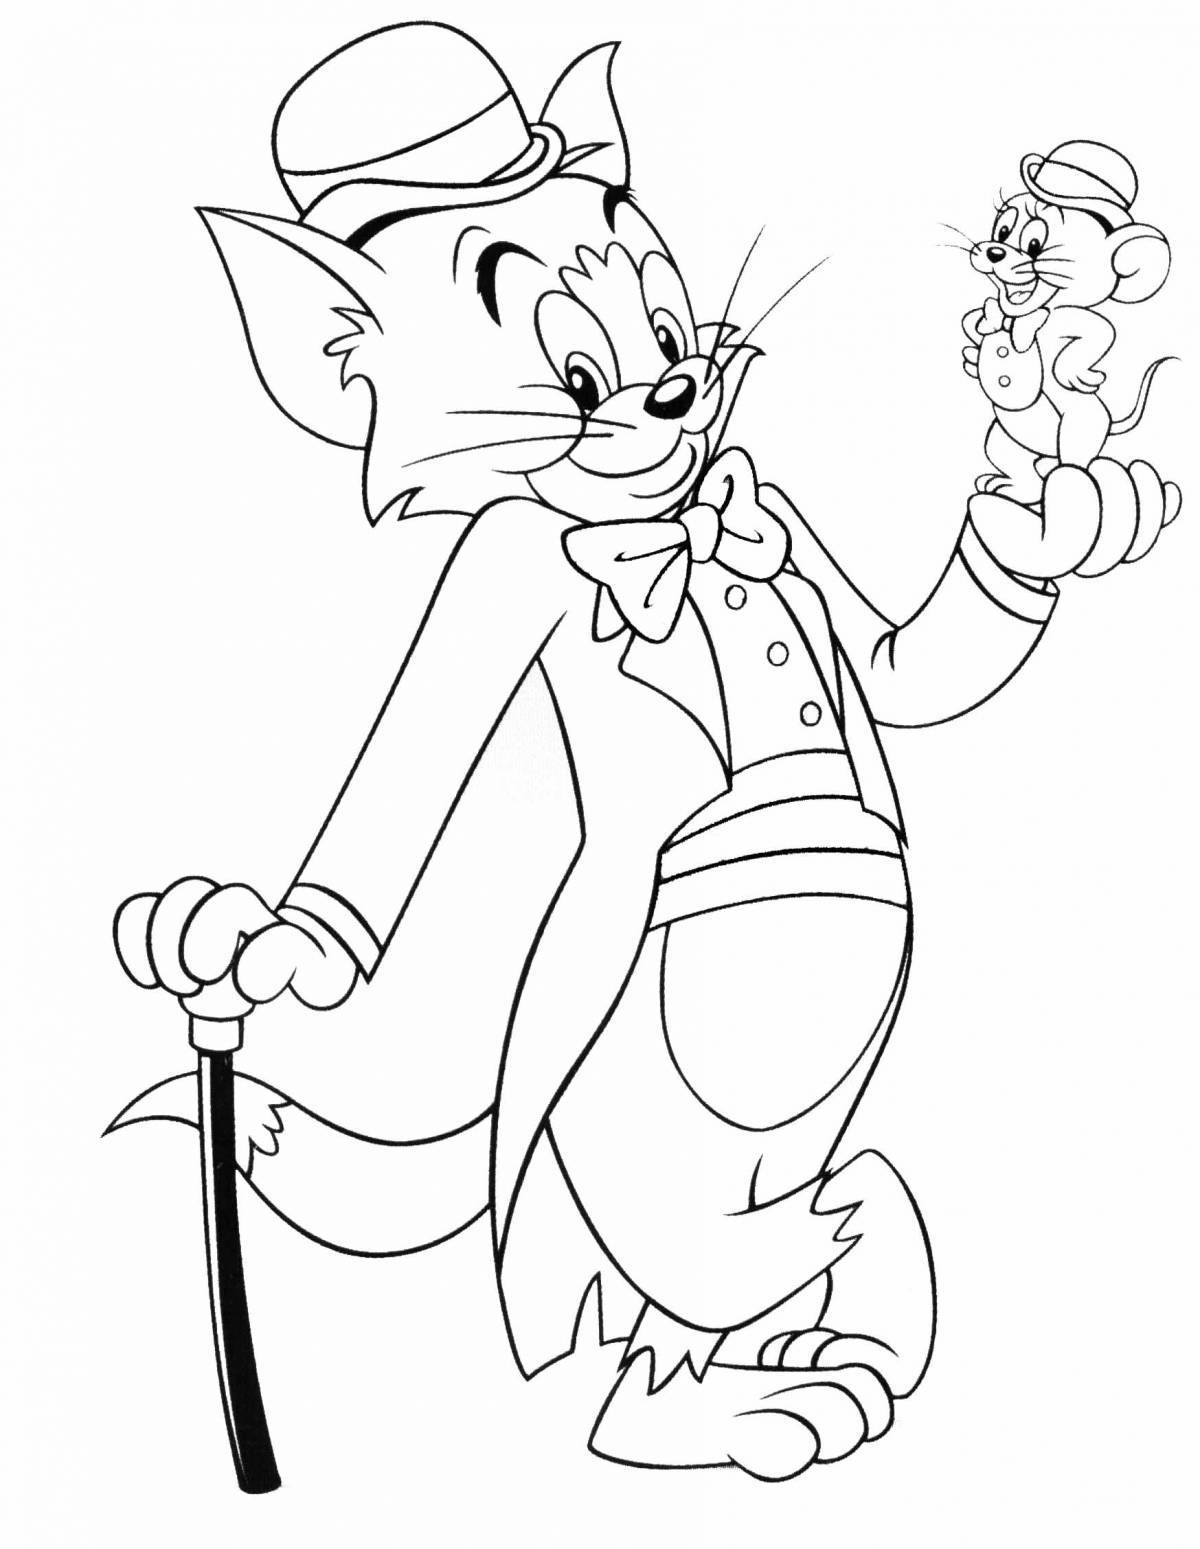 Playful tom and jerry coloring pages for kids